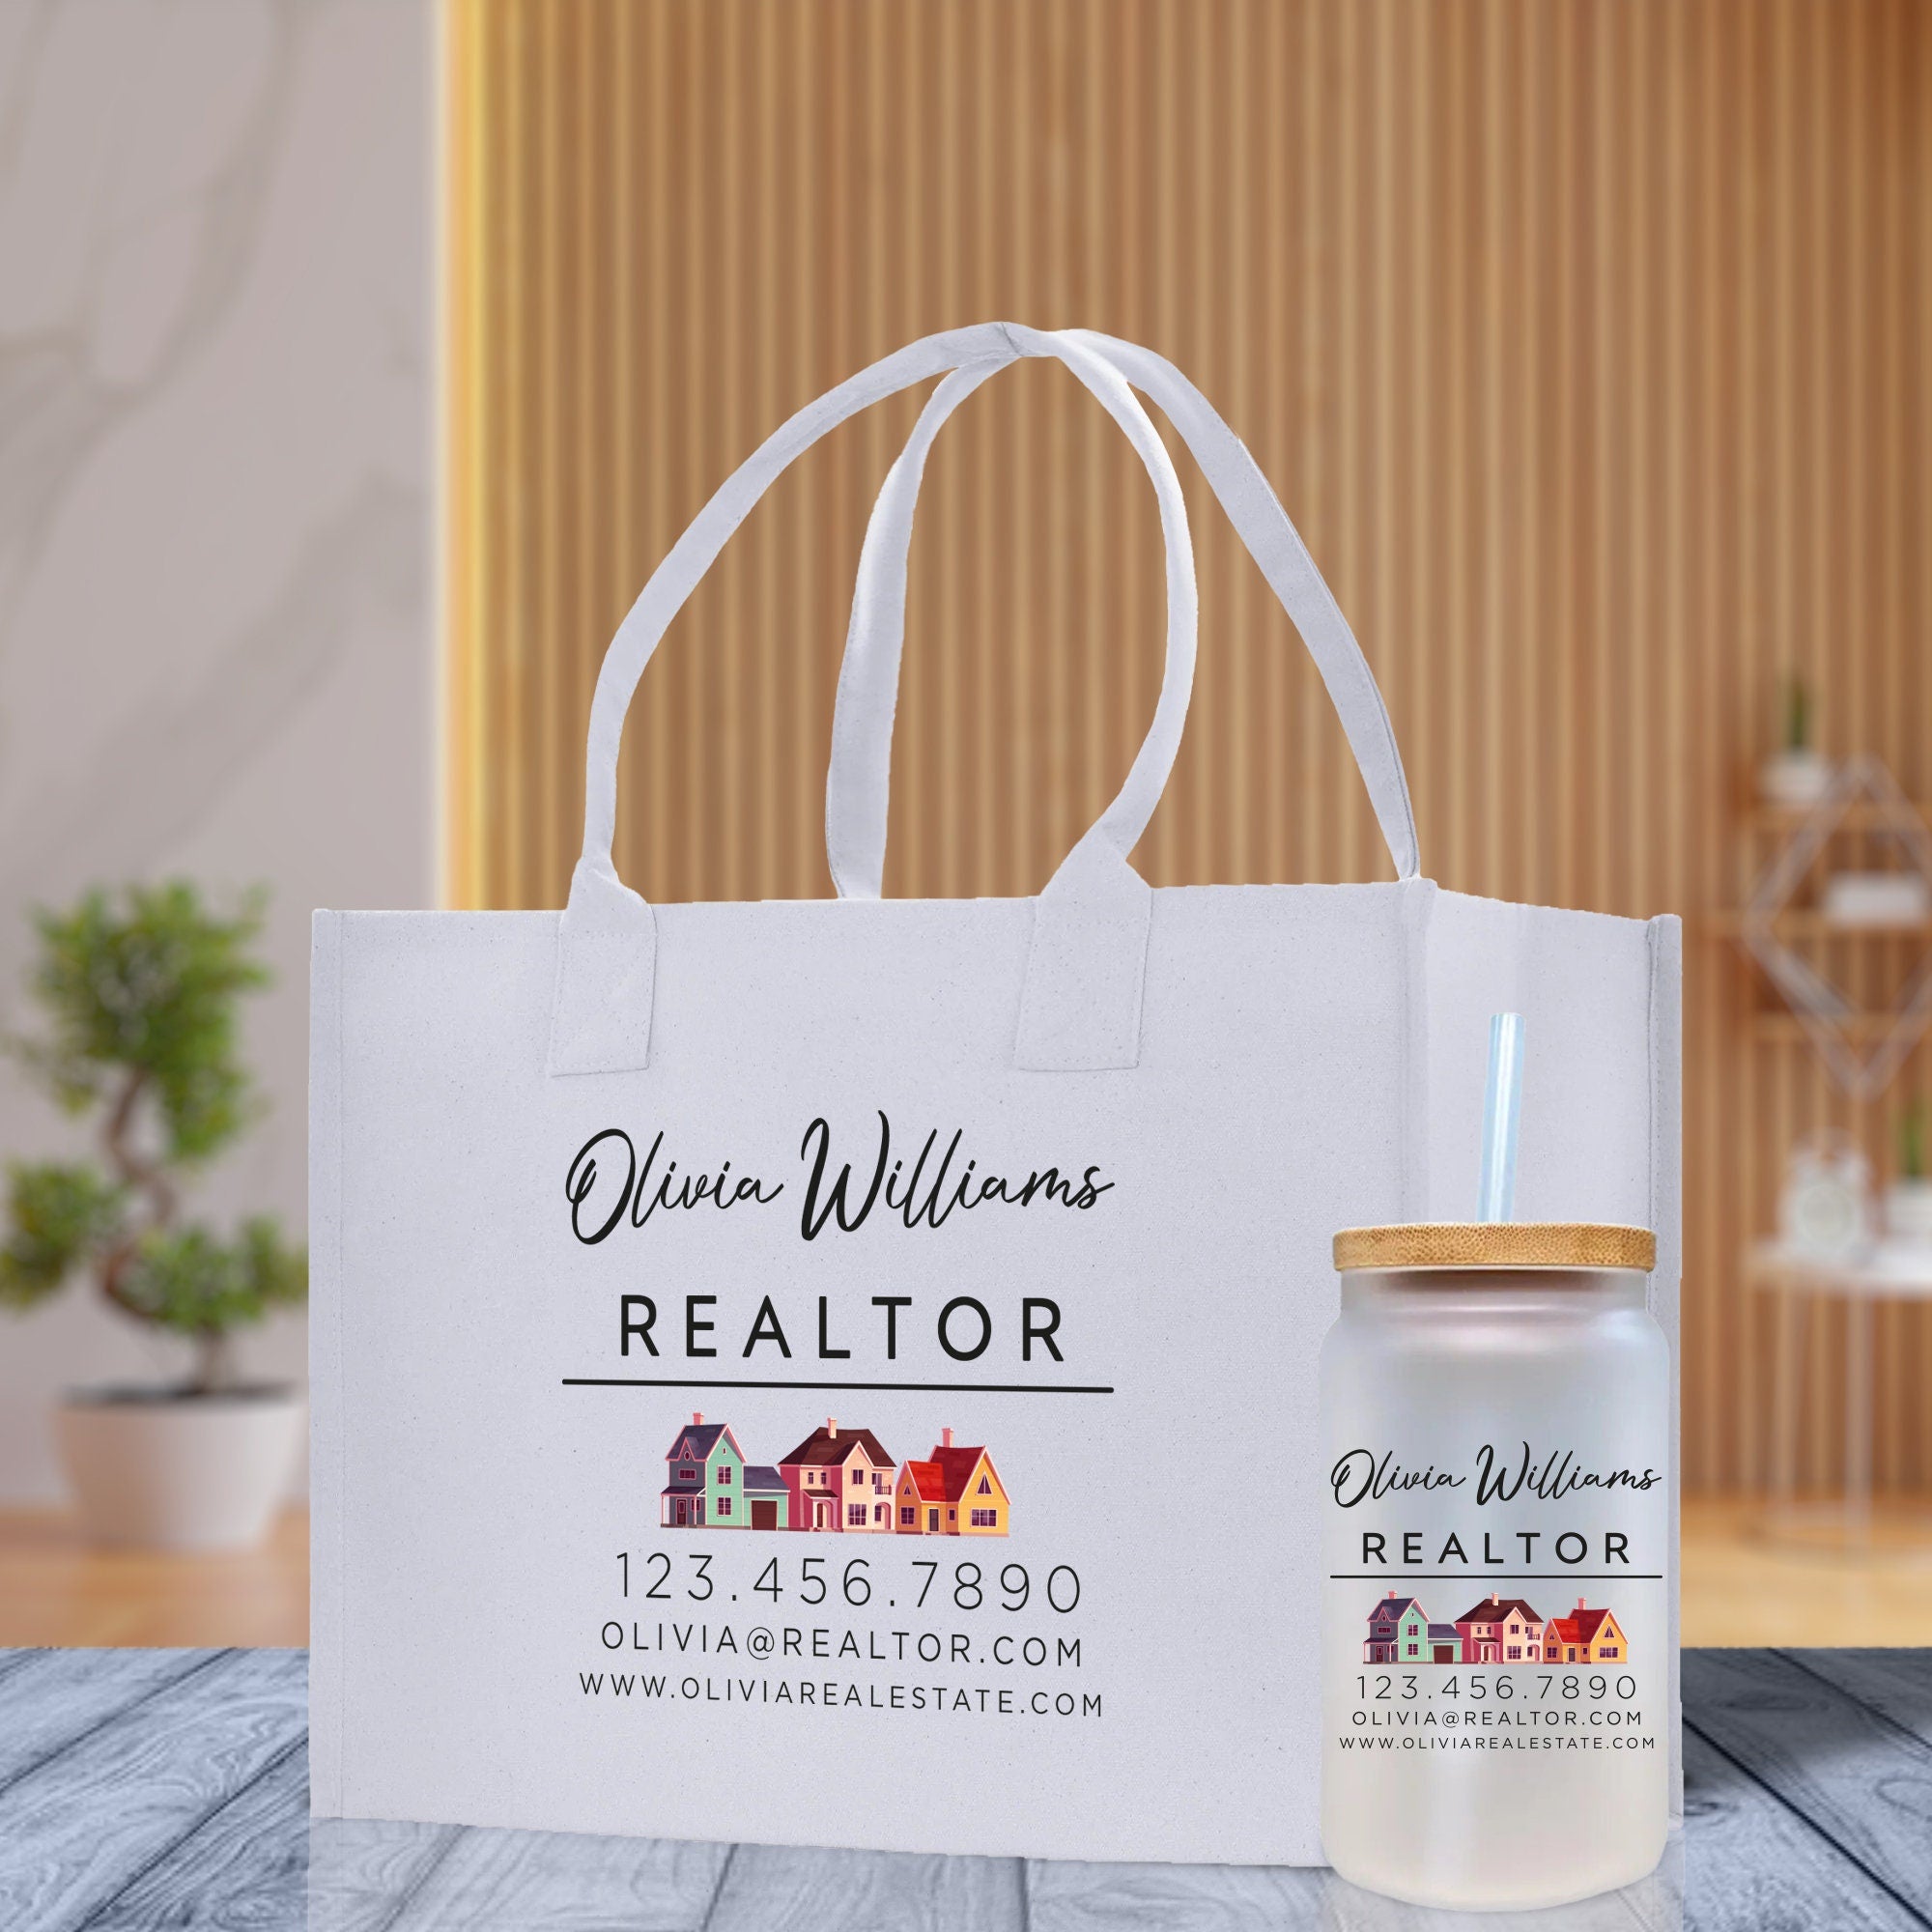 a white bag and a bottle of realtor on a table